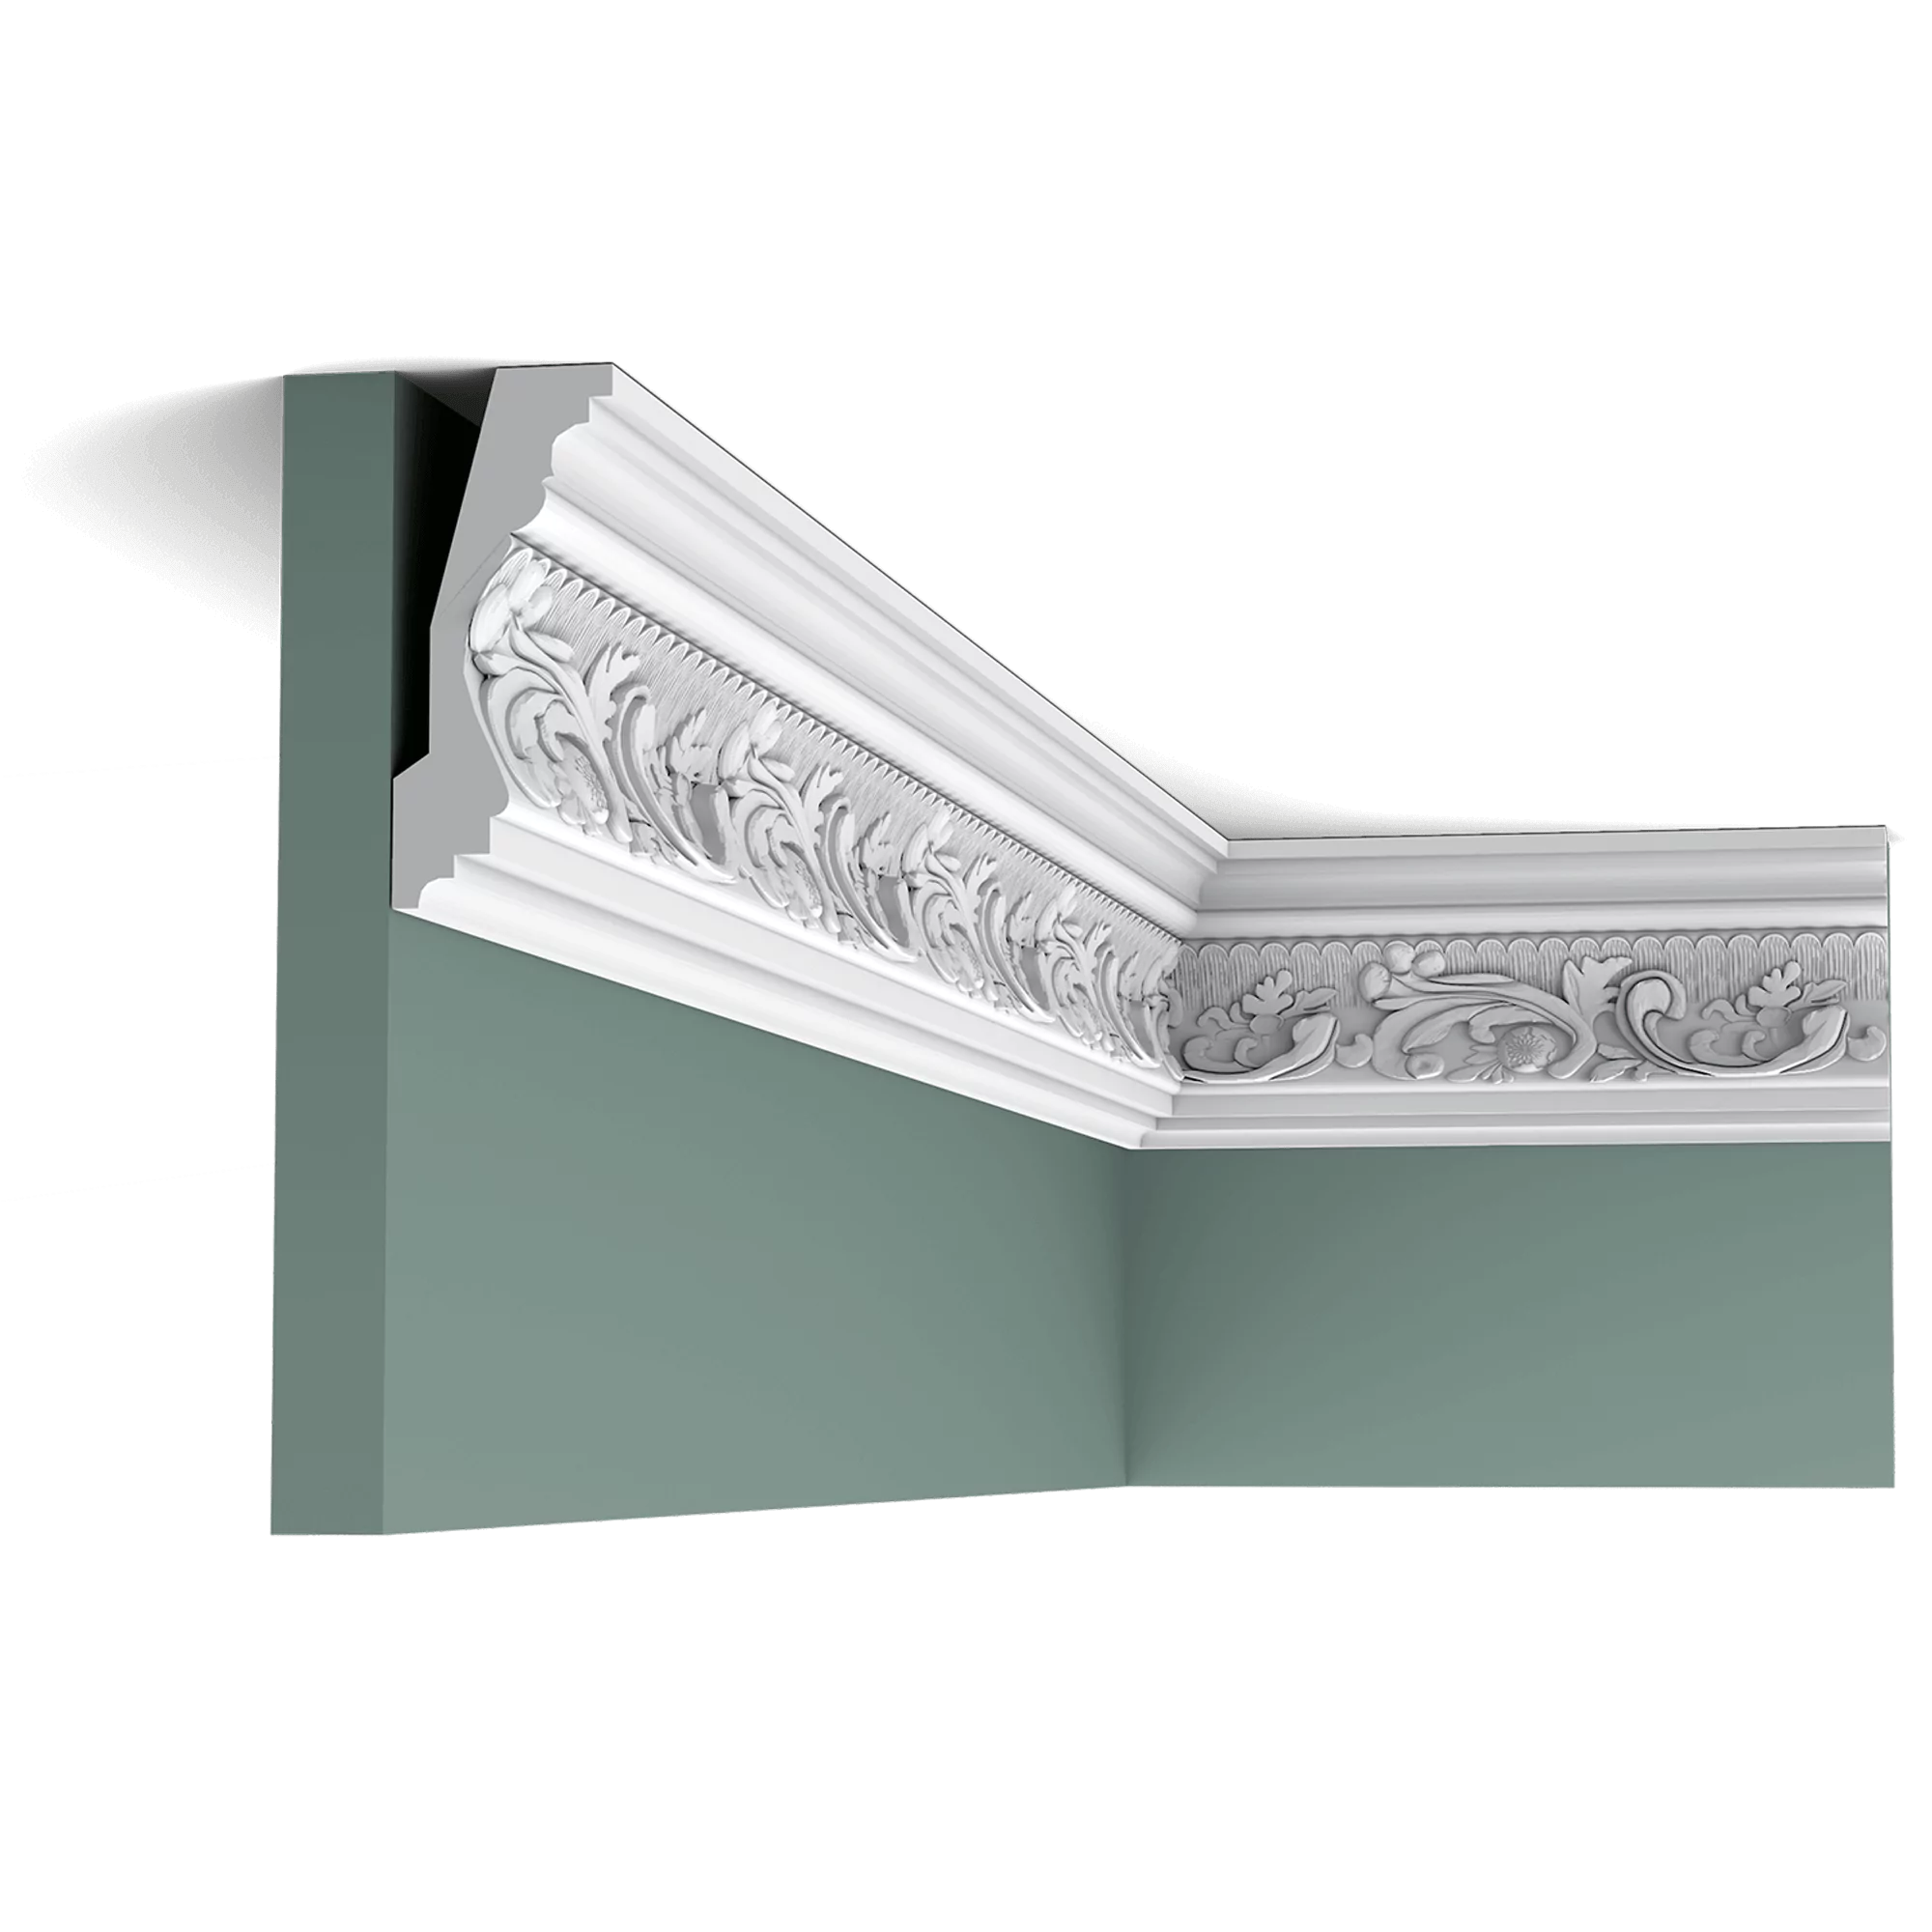 c201 border a37a Classic cornice moulding with detailed pattern of foliage. This moulding will become an eye-catching focus of your interior.